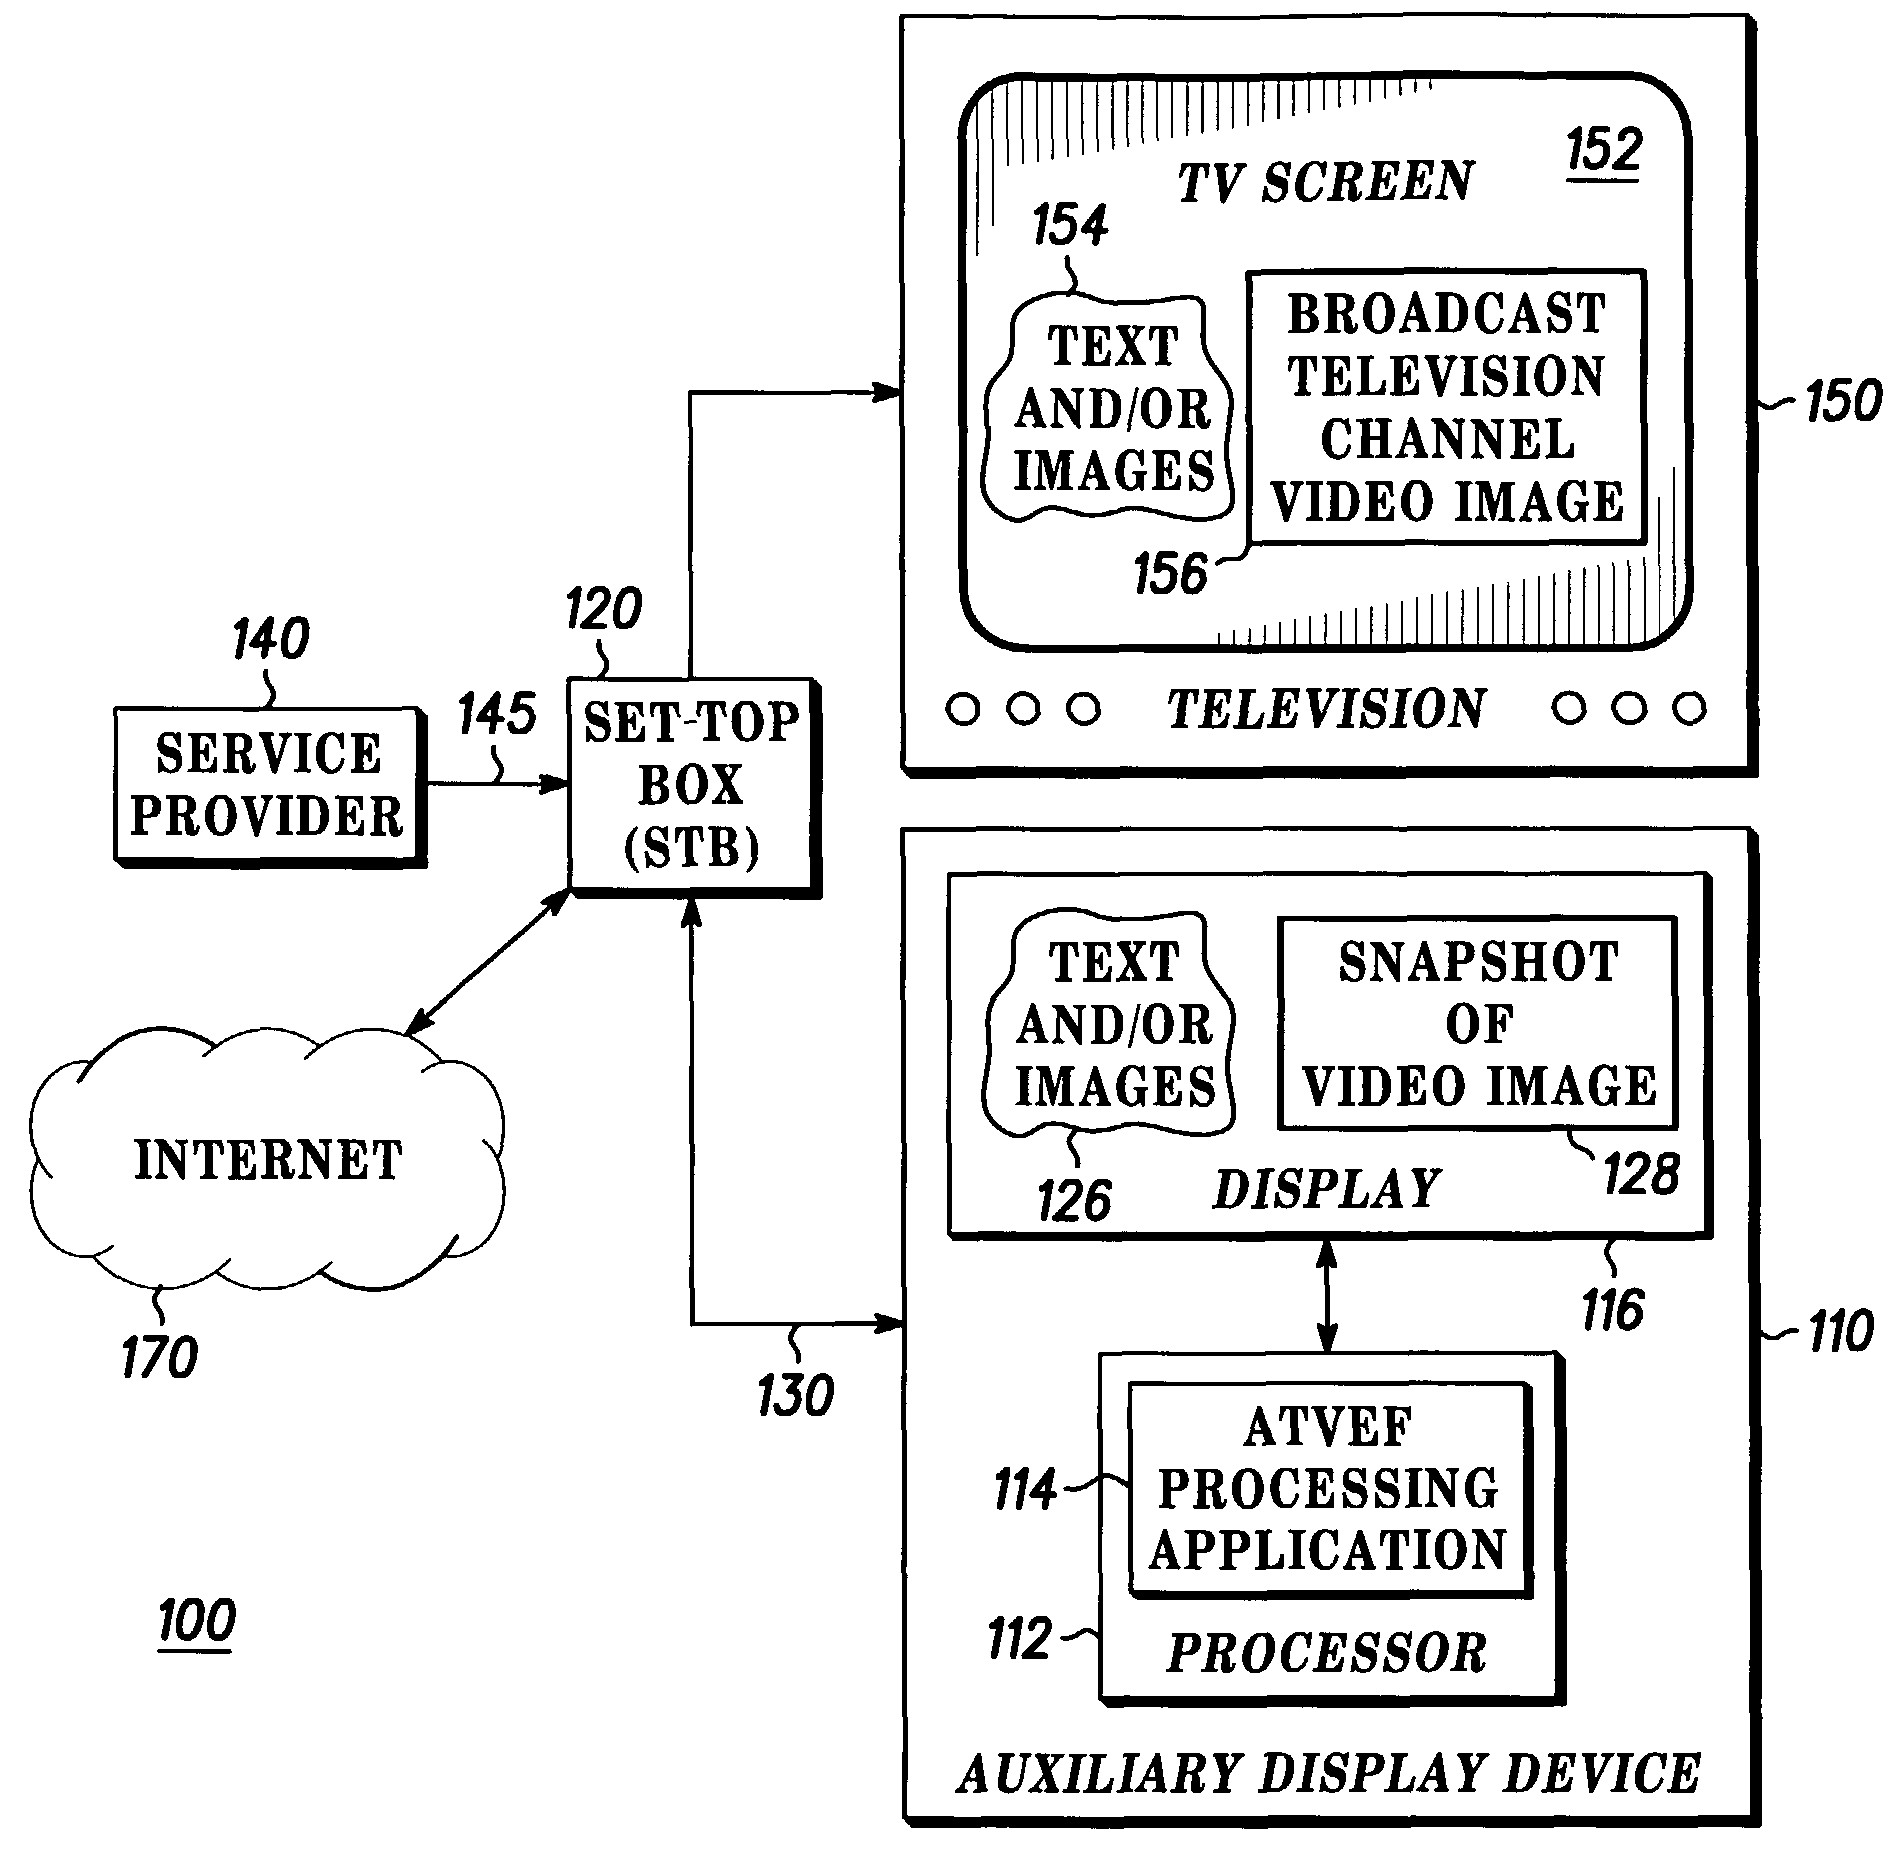 Method and apparatus for forwarding television channel video image snapshots to an auxiliary display device